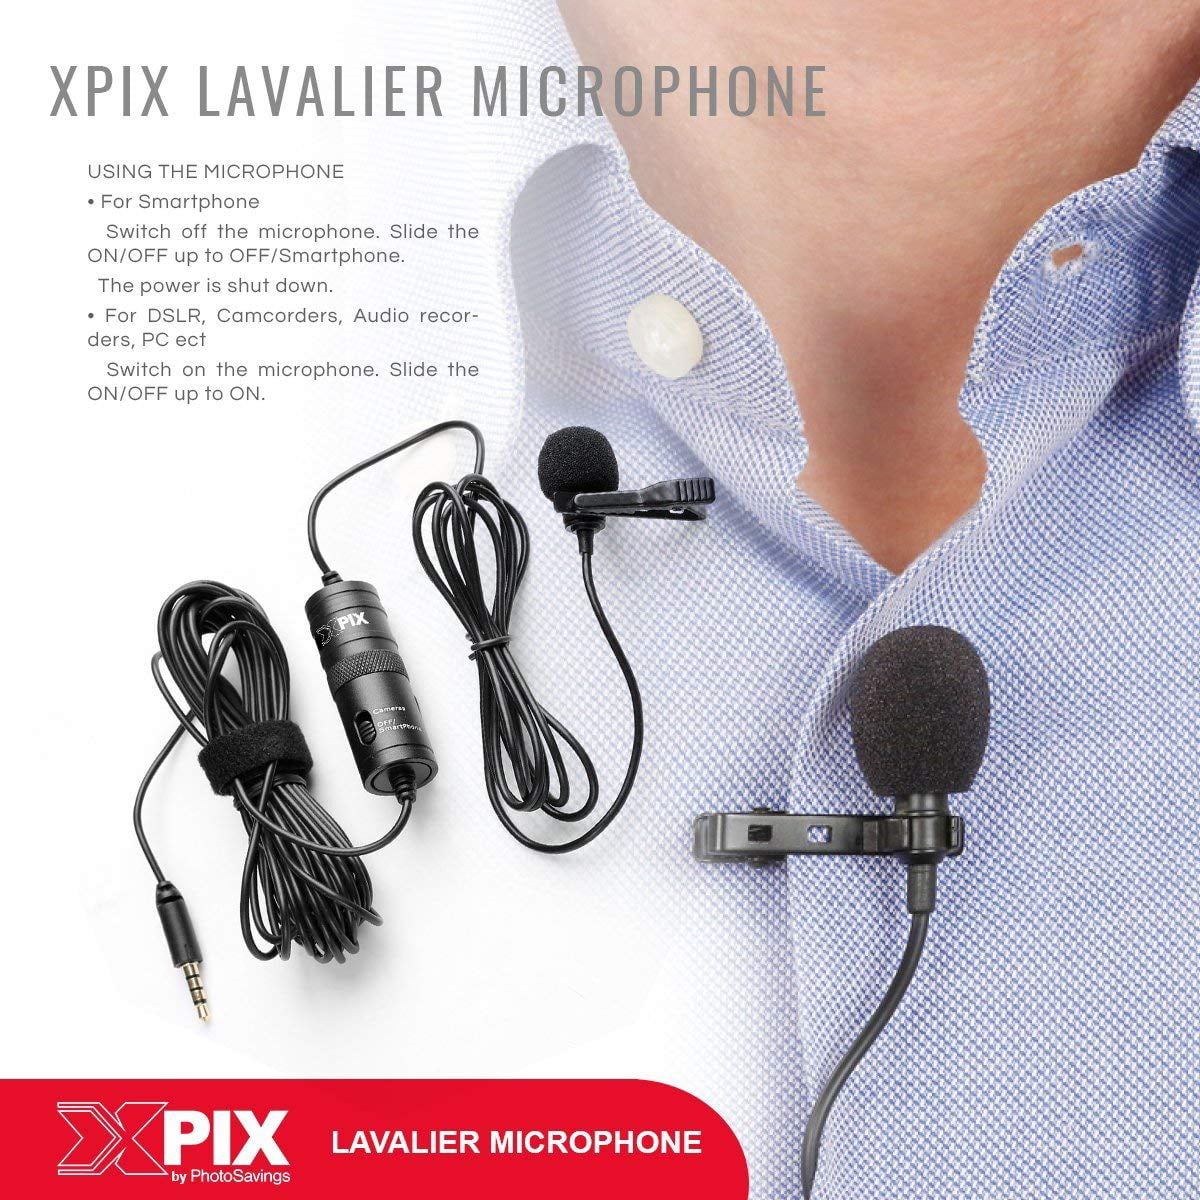 Cleaner Lavalier Mic Beyerdynamic DT770 PRO 32 ohms Headphones with Amplifier and FiberTique Cleaning Cloth 